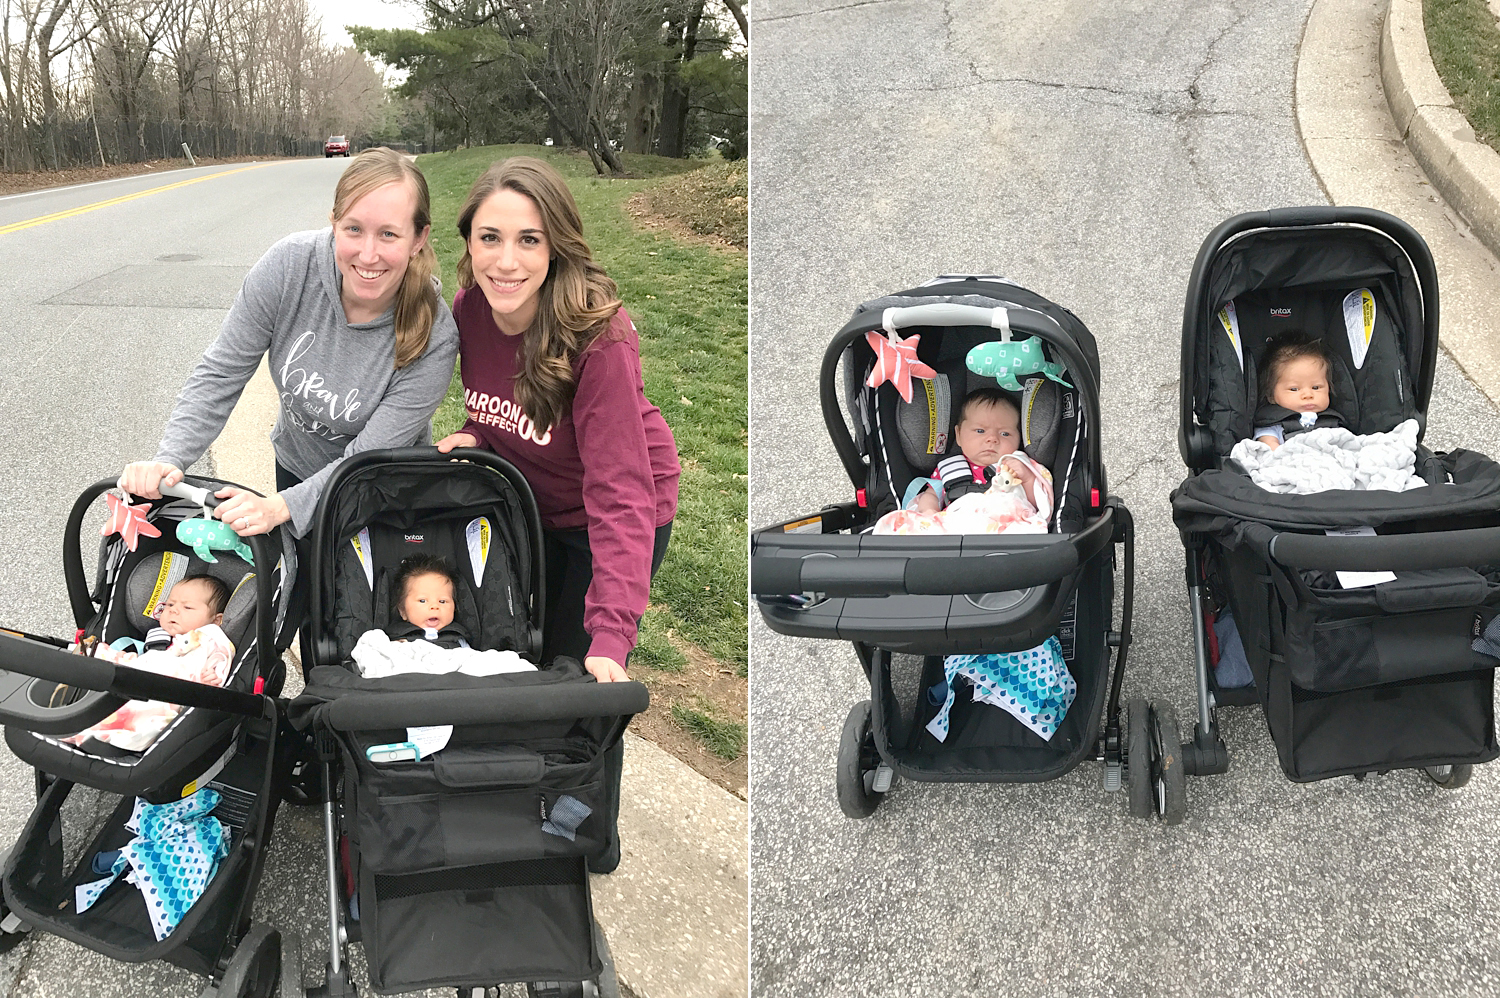  Going for walks was the best. The babies fell asleep every time!&nbsp; 